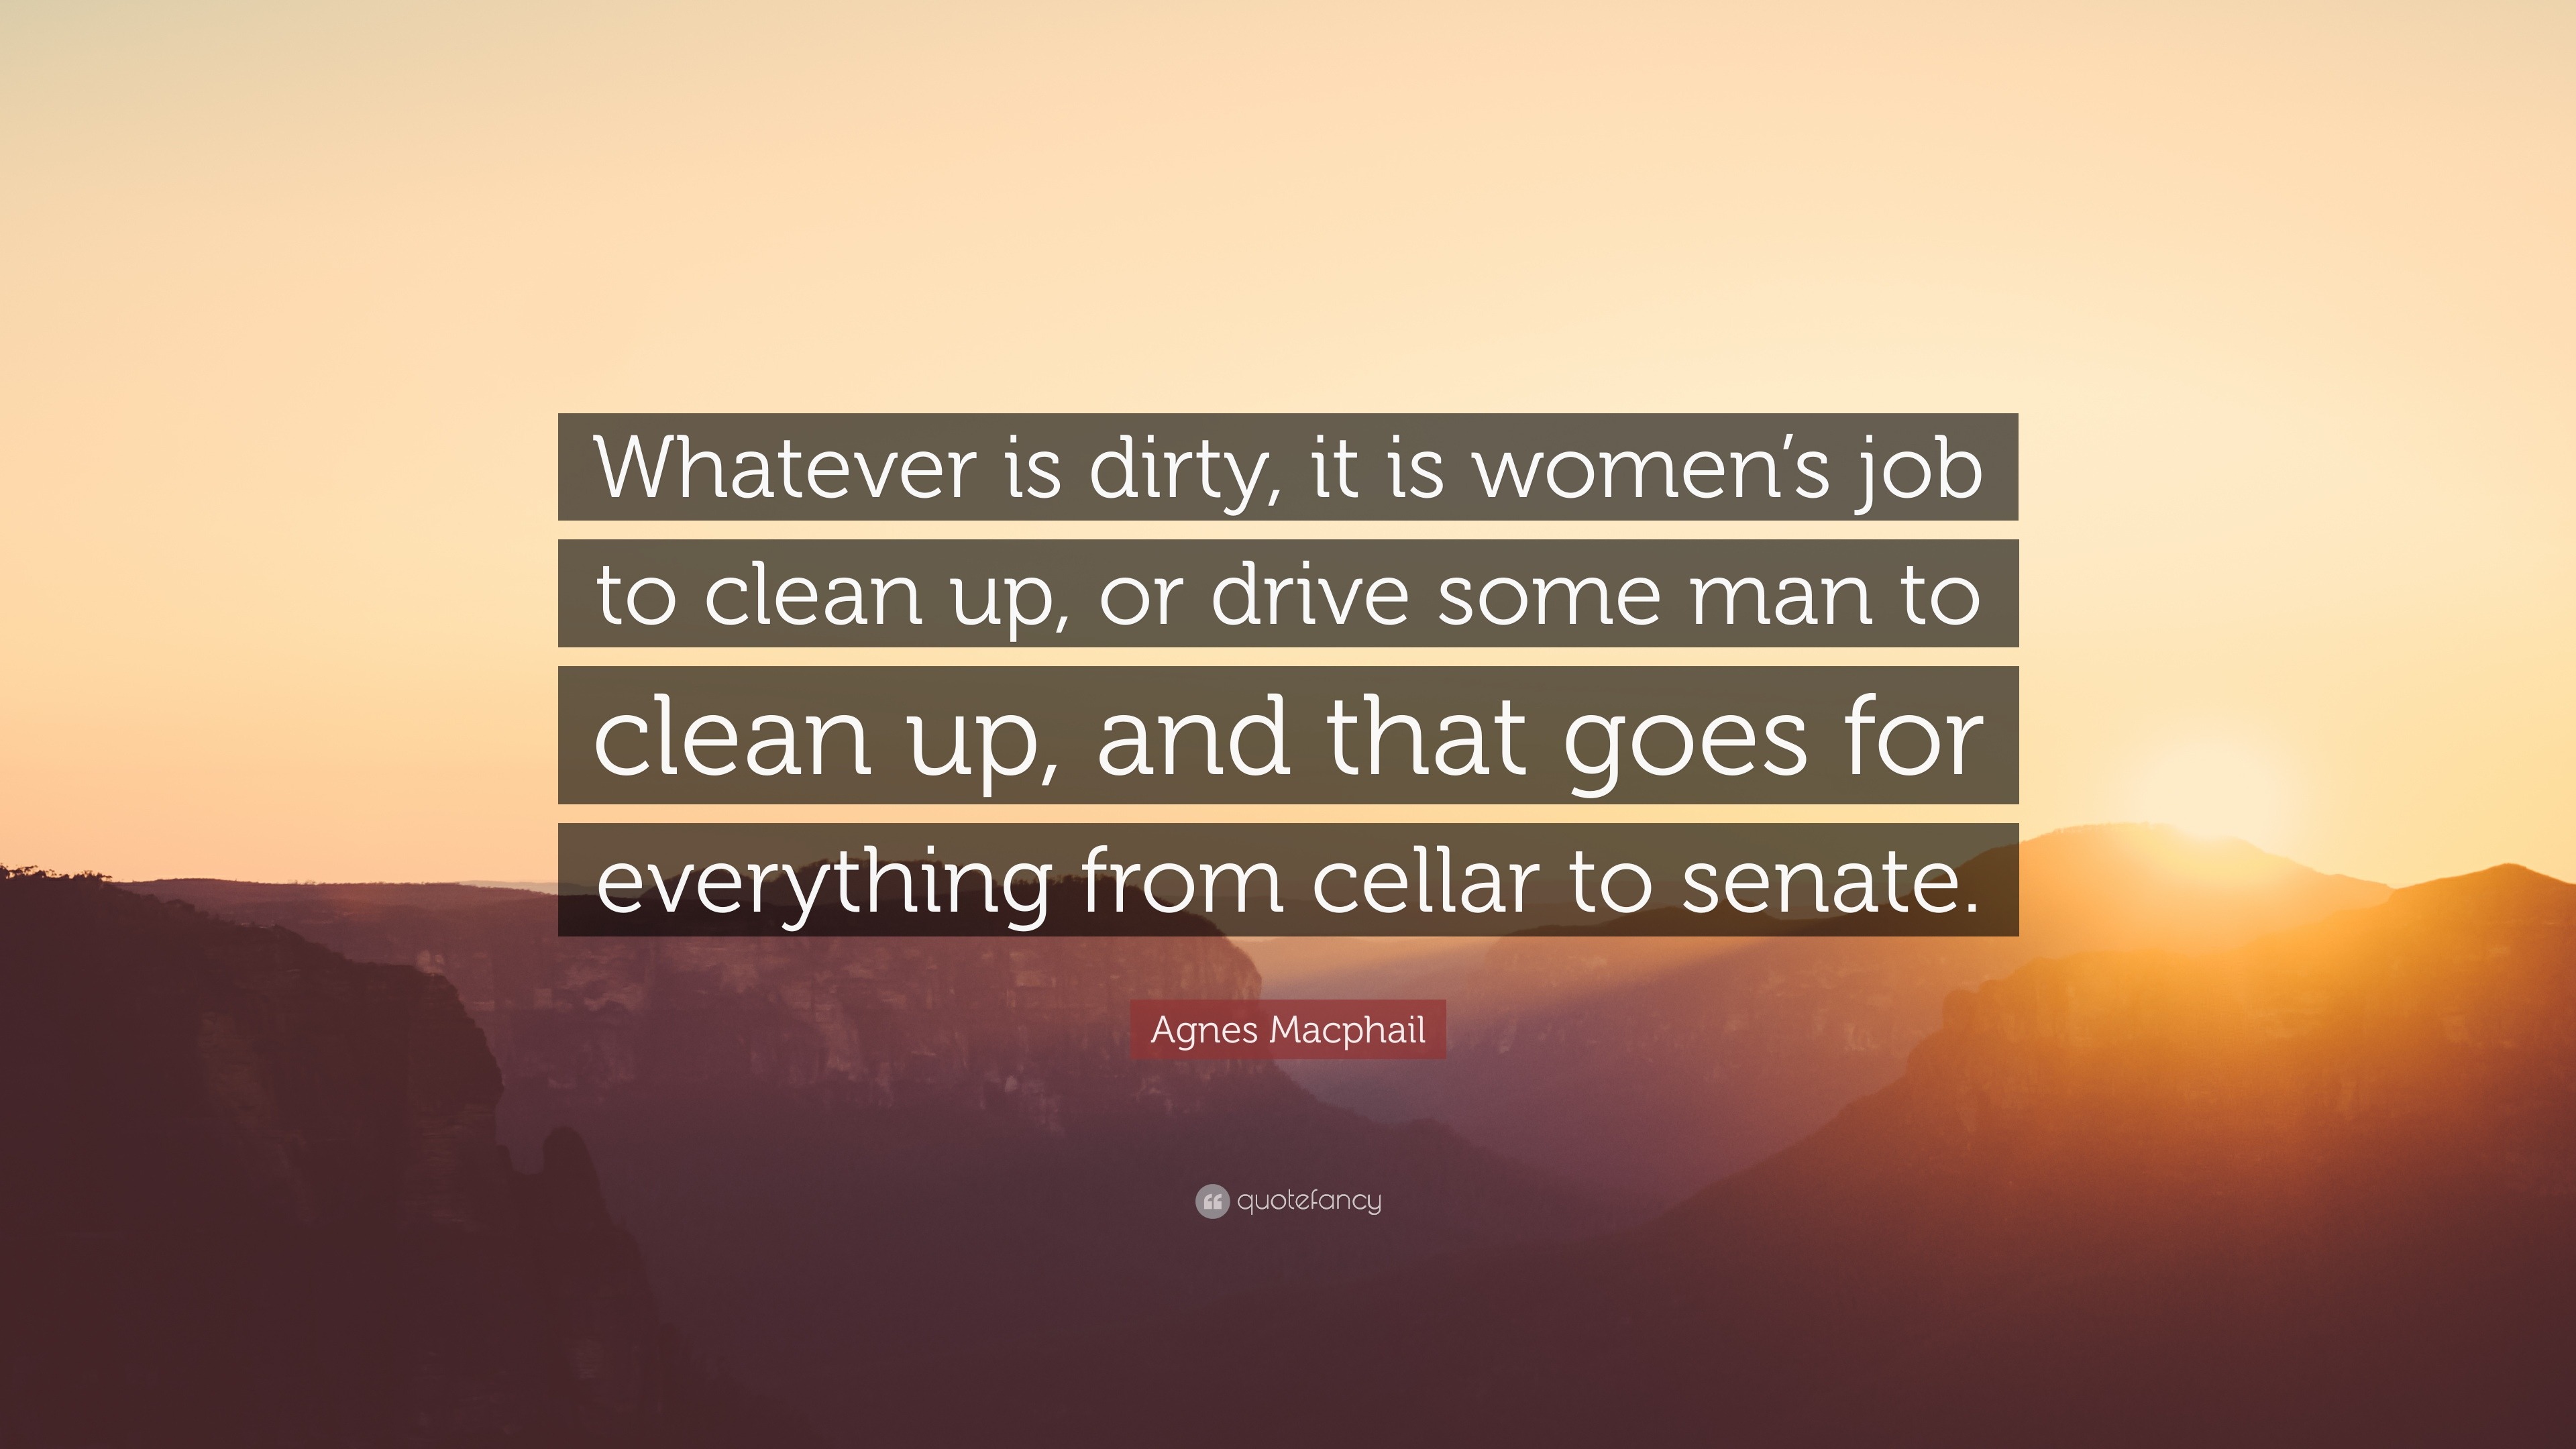 Agnes Macphail Quote: “Whatever is dirty, it is women’s job to clean up ...